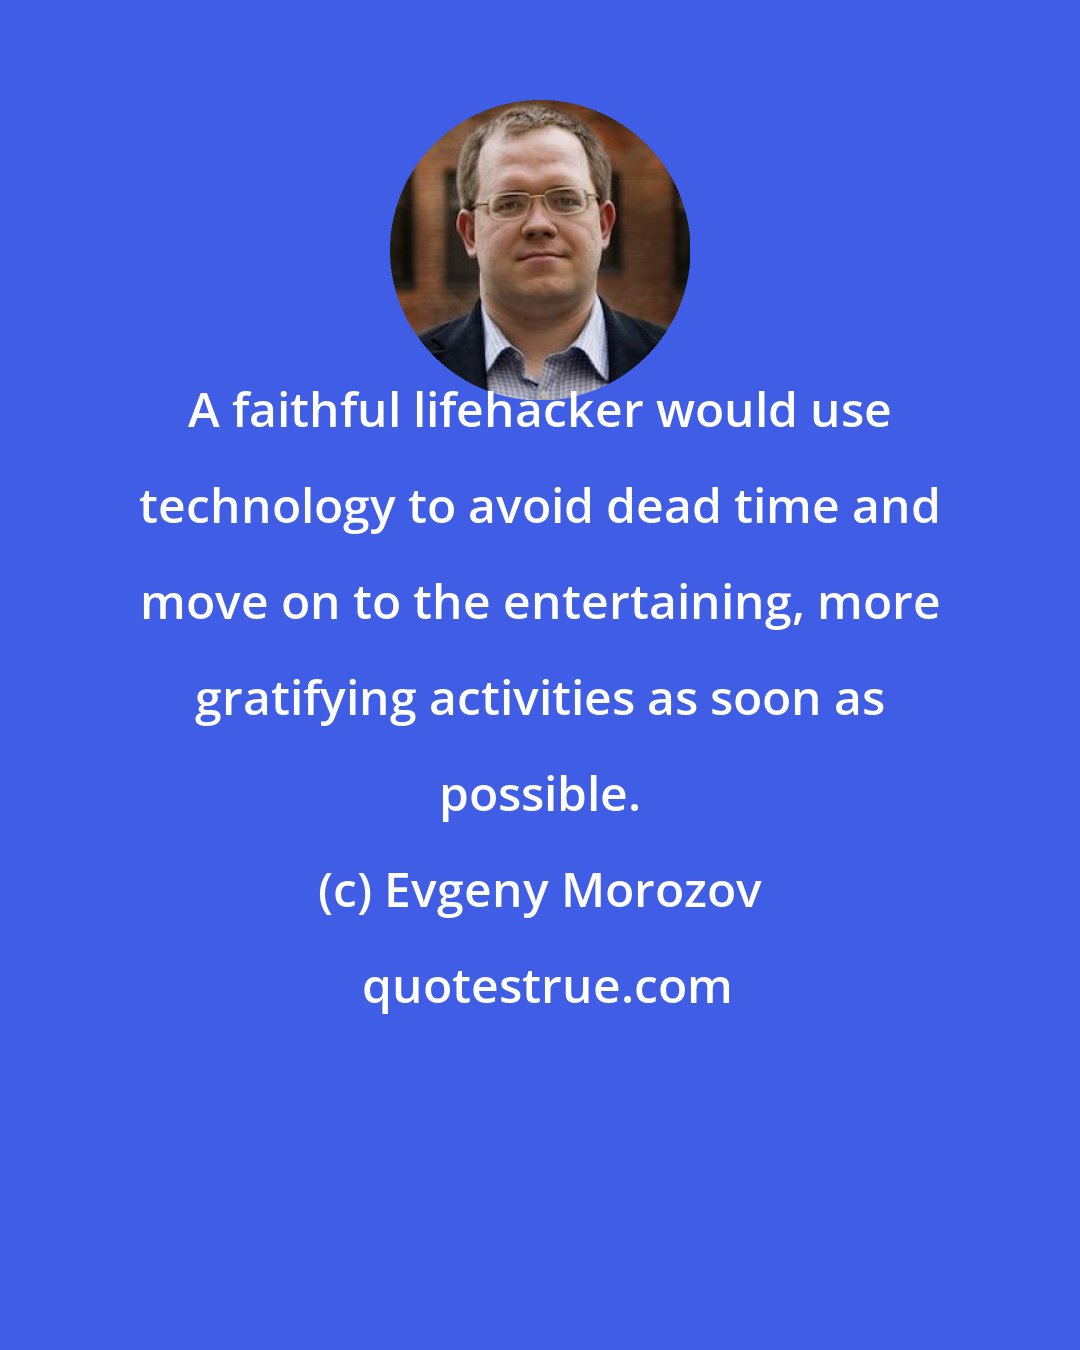 Evgeny Morozov: A faithful lifehacker would use technology to avoid dead time and move on to the entertaining, more gratifying activities as soon as possible.